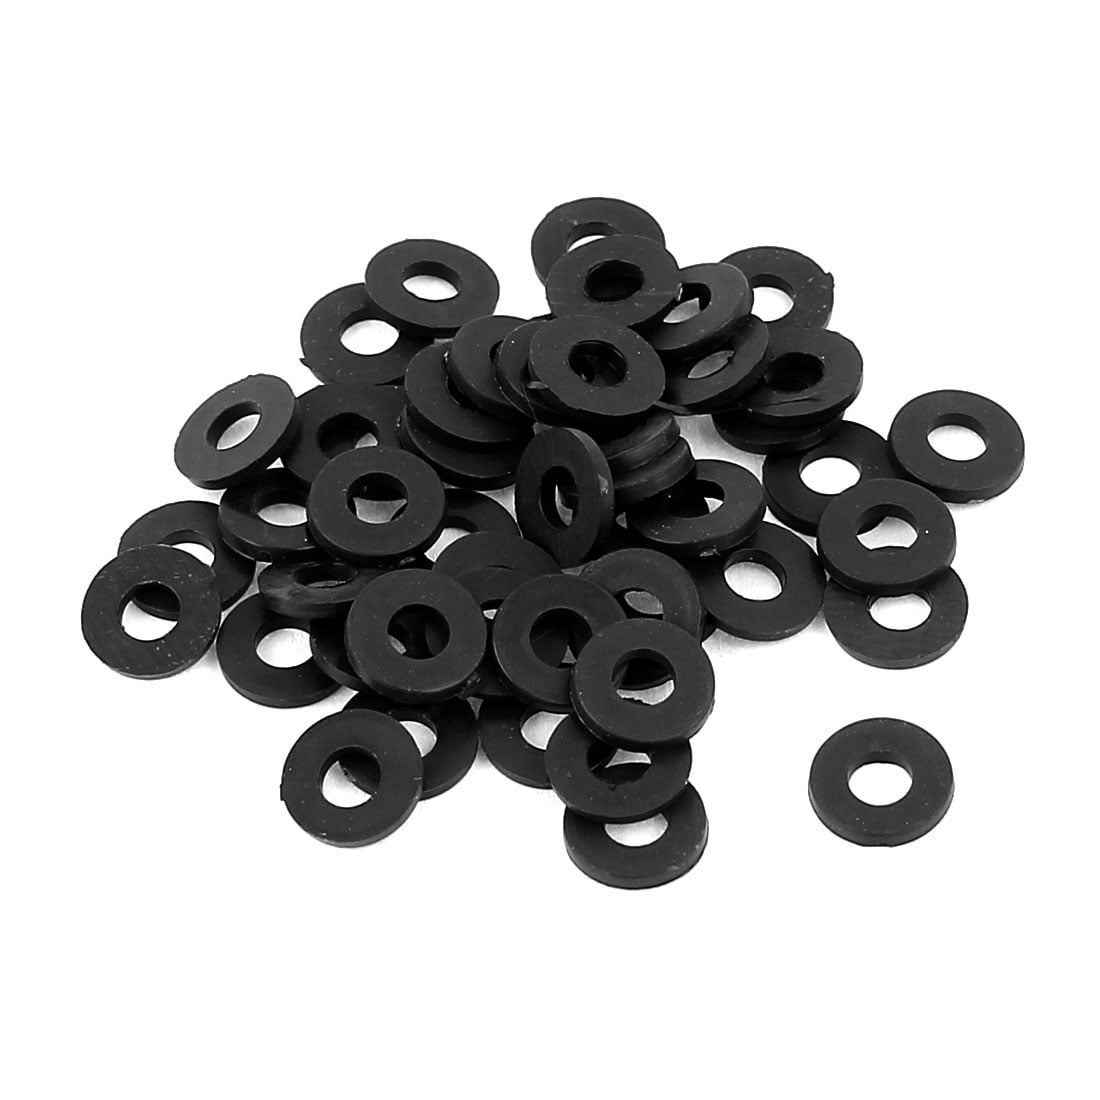 Multiple Thick 1mm Copper Flat Gaskets Crush Washer Sealing Ring Spacer For Boat 